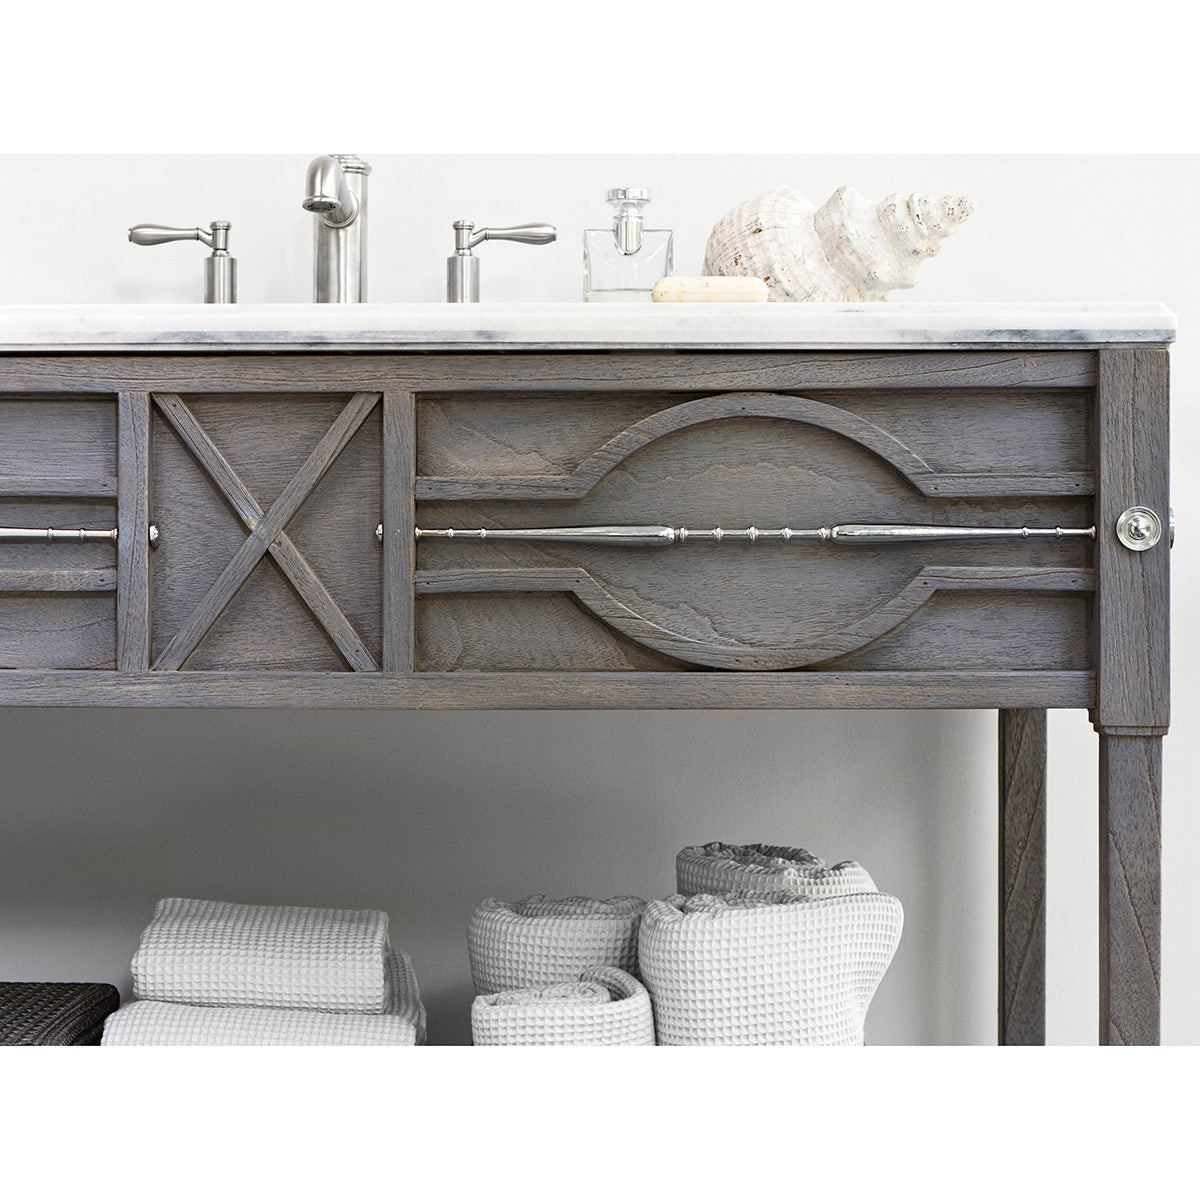 Ambella Home Spindle Sink Chest